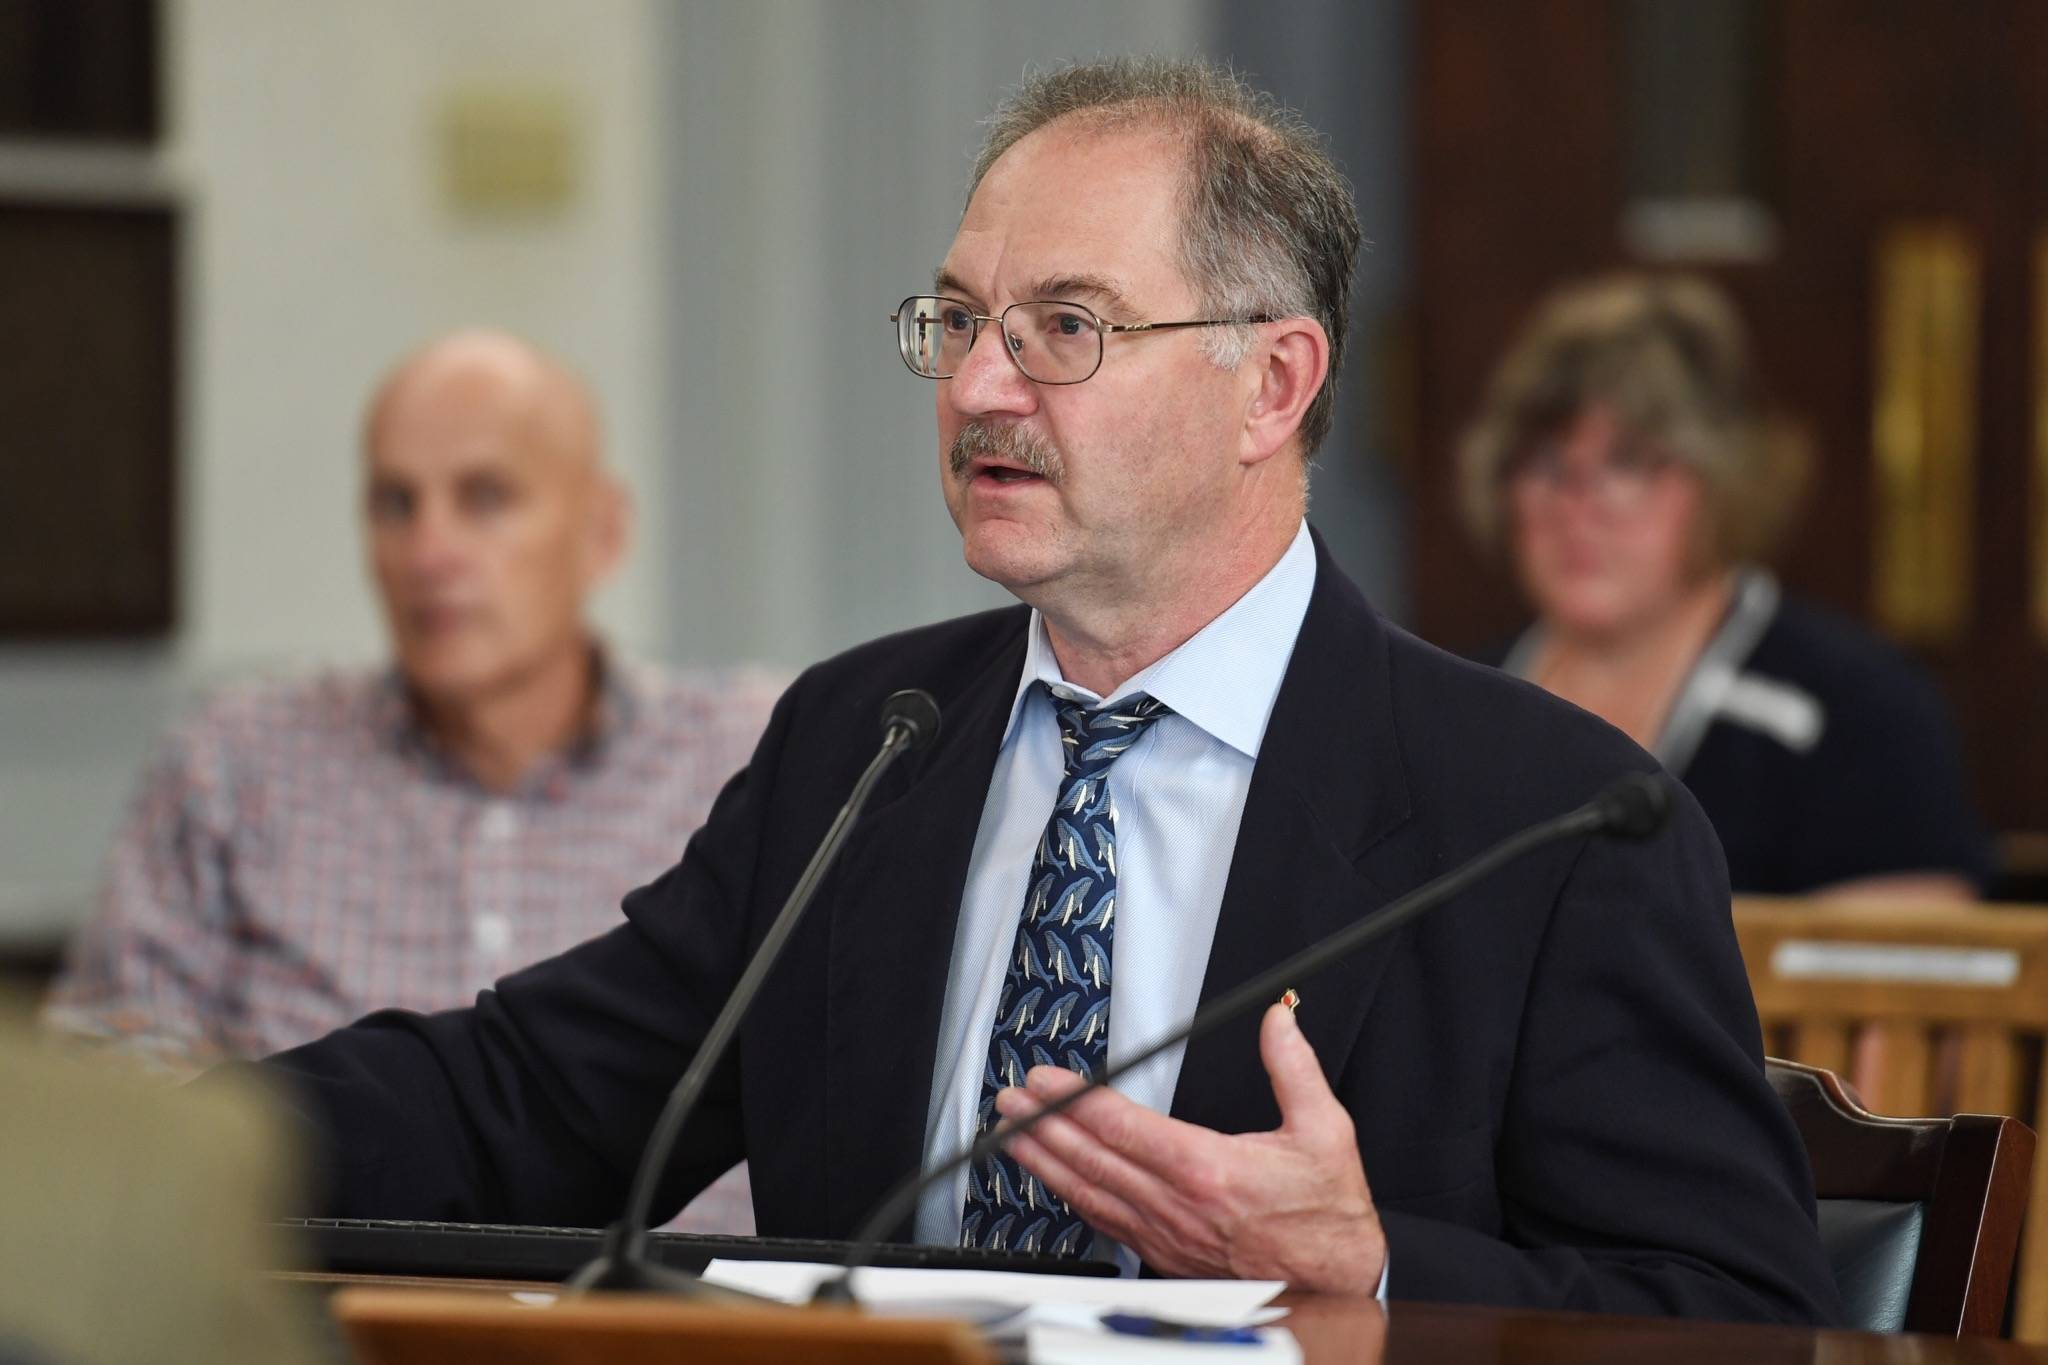 David Teal, director of Legislative Finance, gives a FY20 Budget update to the Senate Finance Committee at the Capitol on Tuesday, July 9, 2019. (Michael Penn | Juneau Empire)